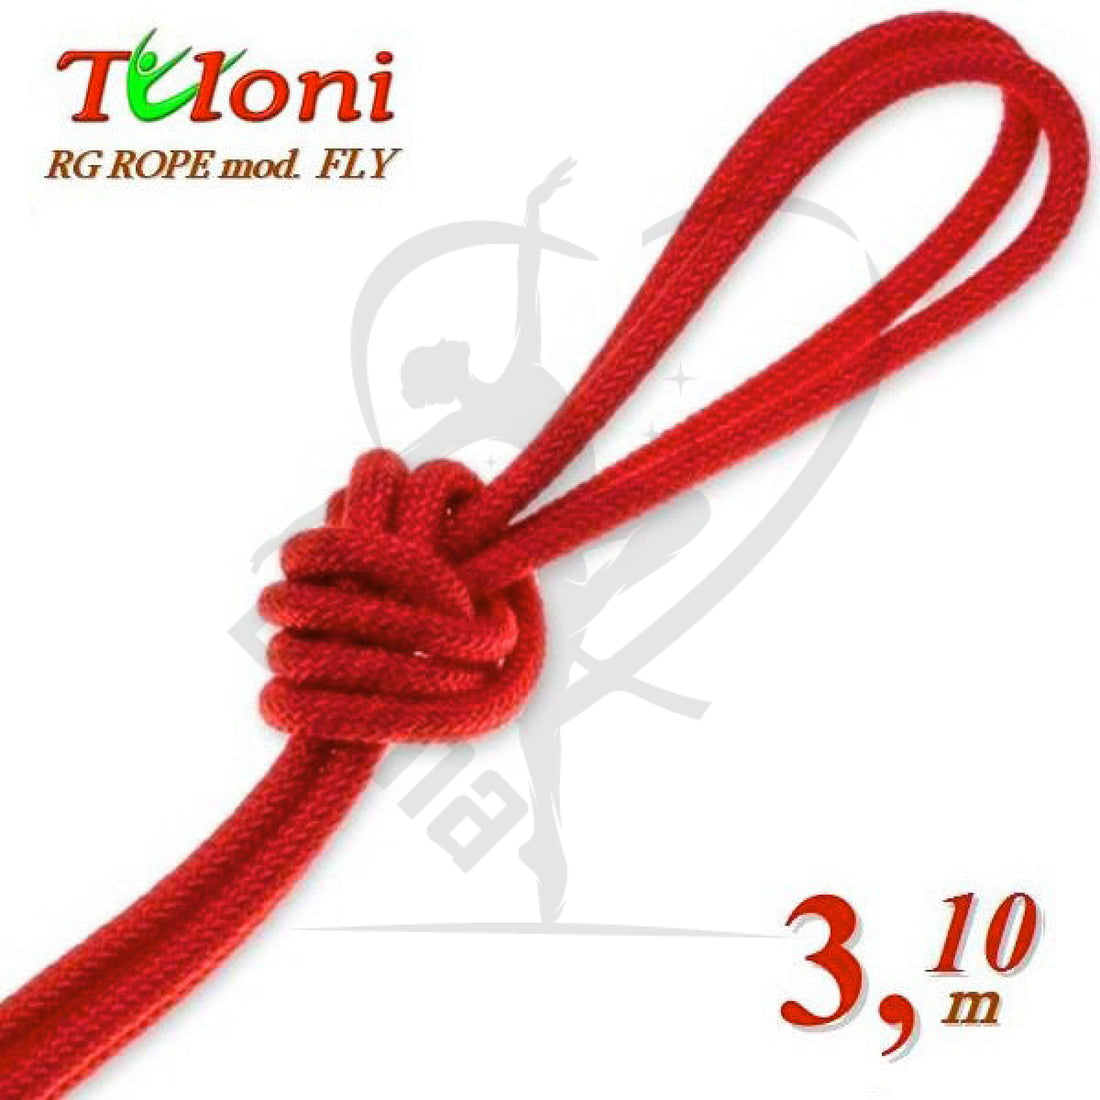 Tuloni Competition Rope For Seniors Mod. Fly 3.1M Red Ropes